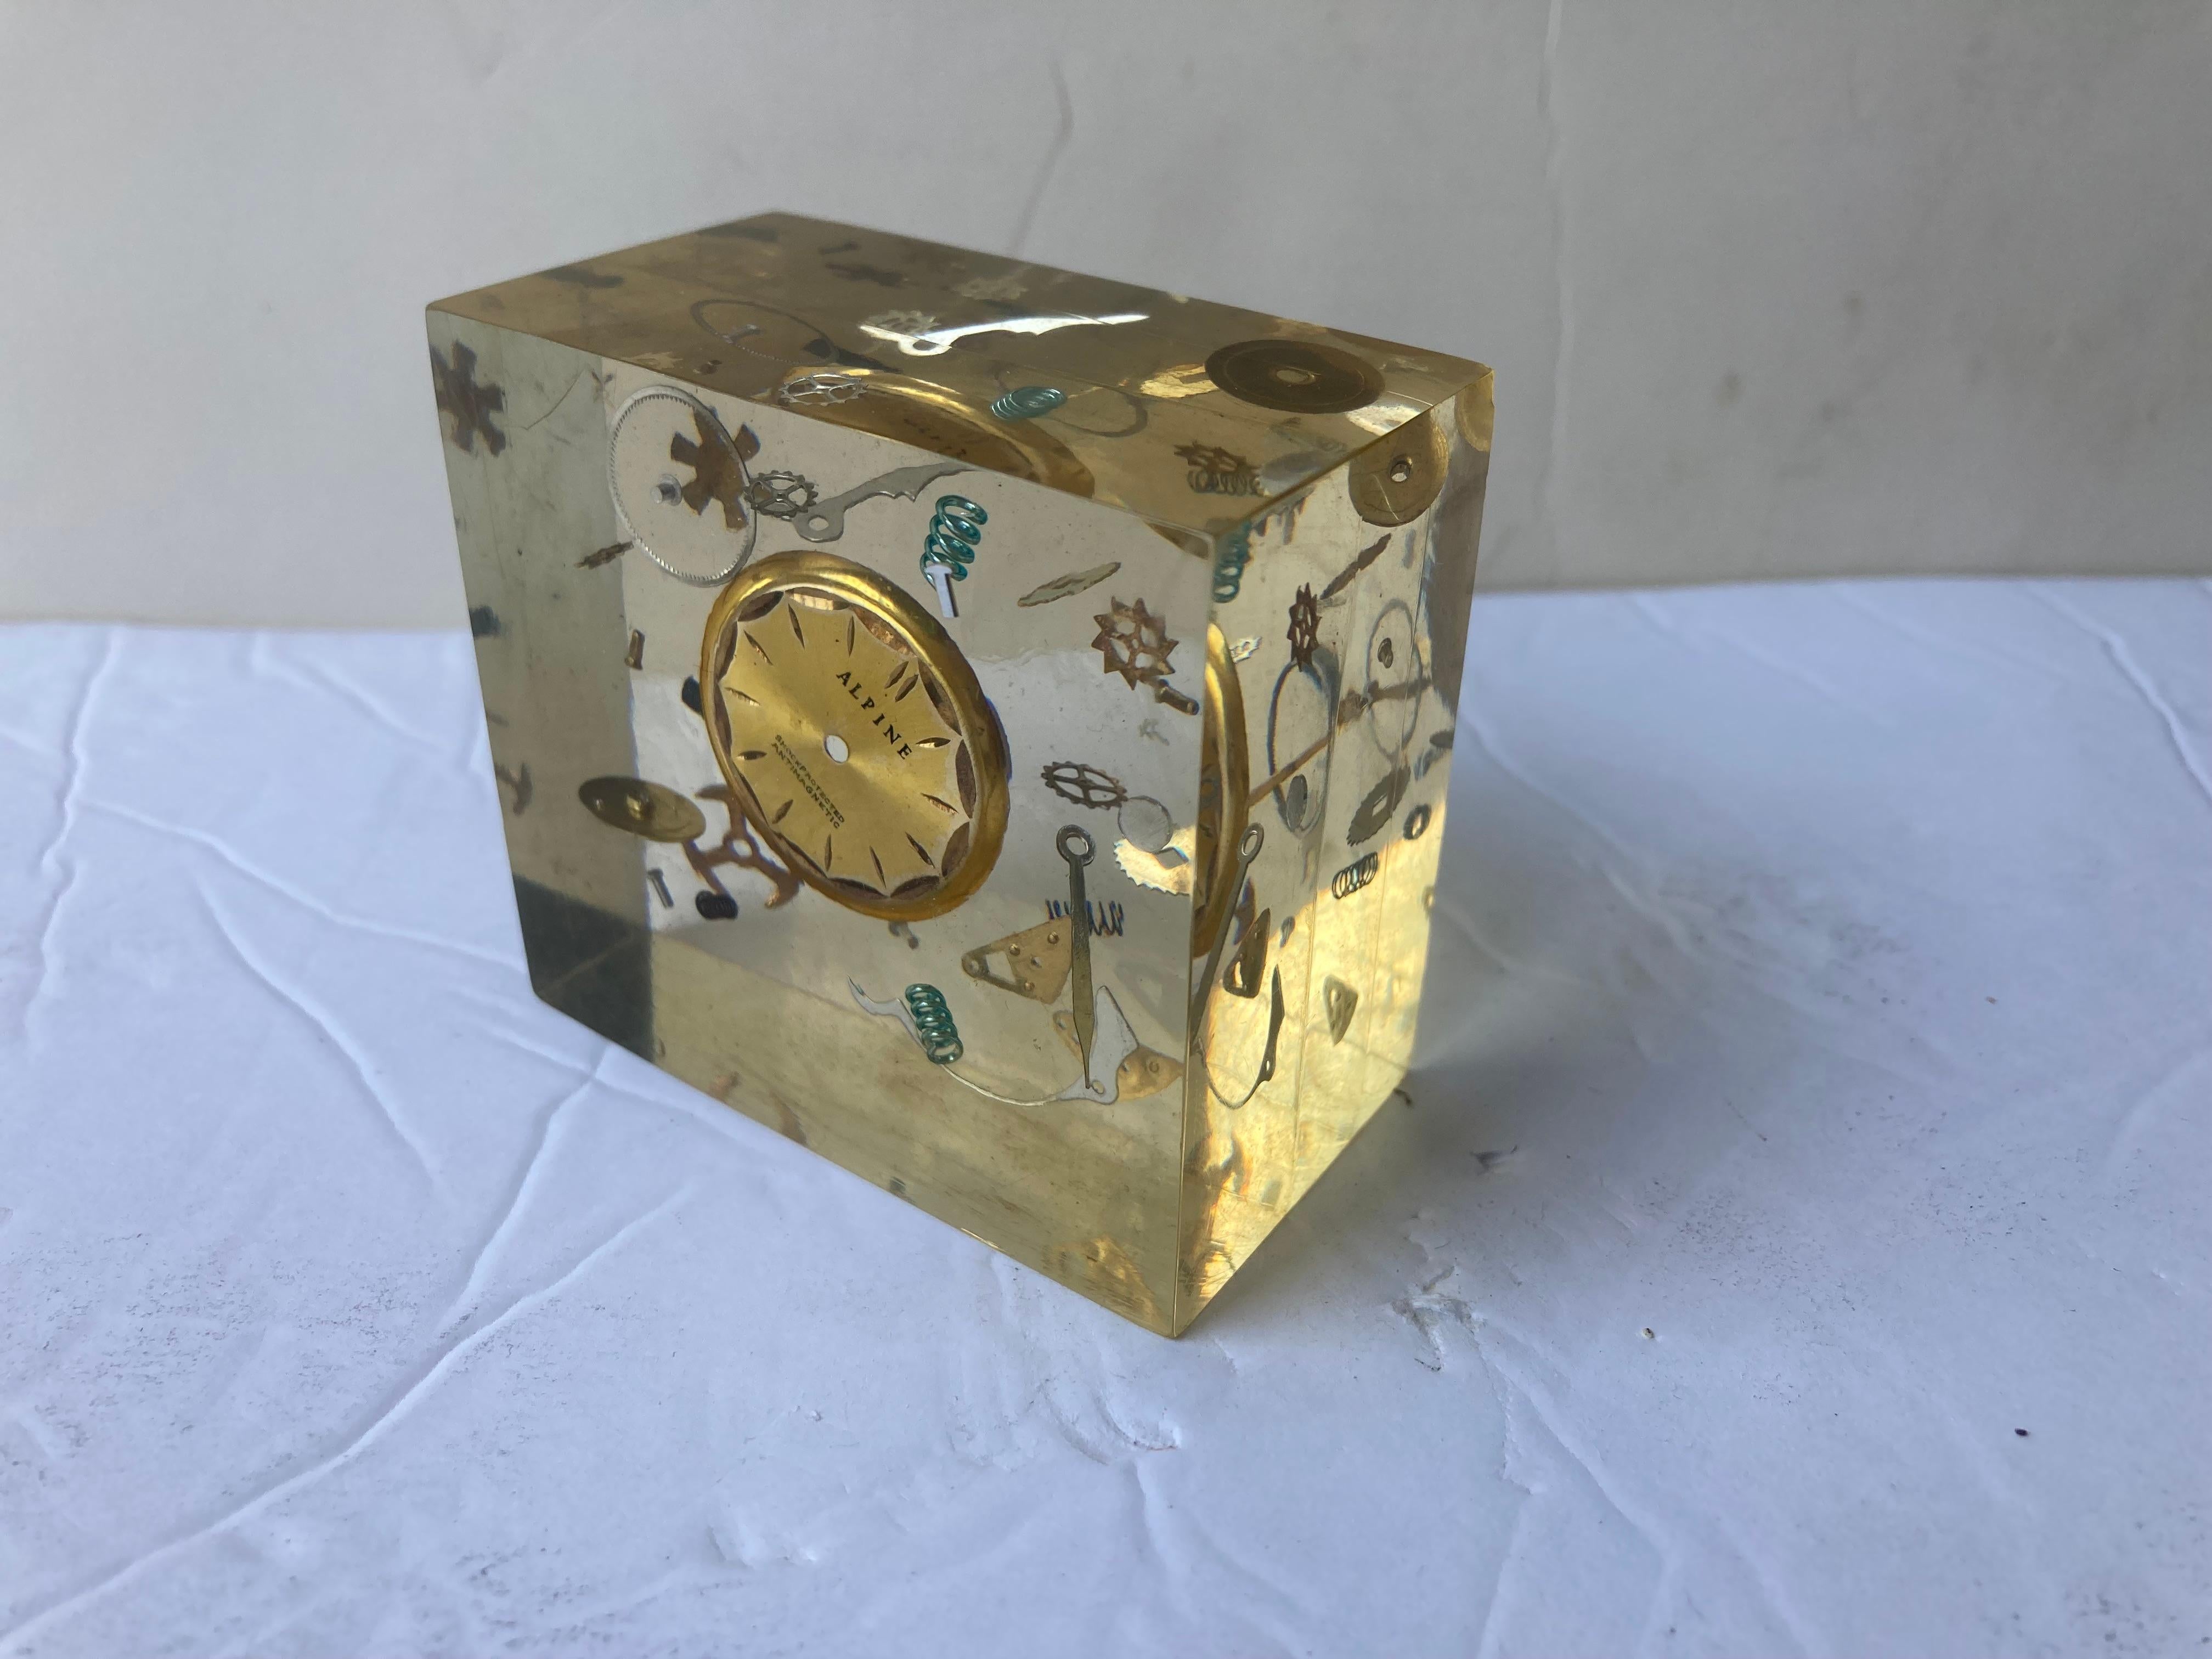 Hand-Crafted Lucite Resin Sculpture/Paperweight Attb to Pierre Giraudon with Clock Parts For Sale